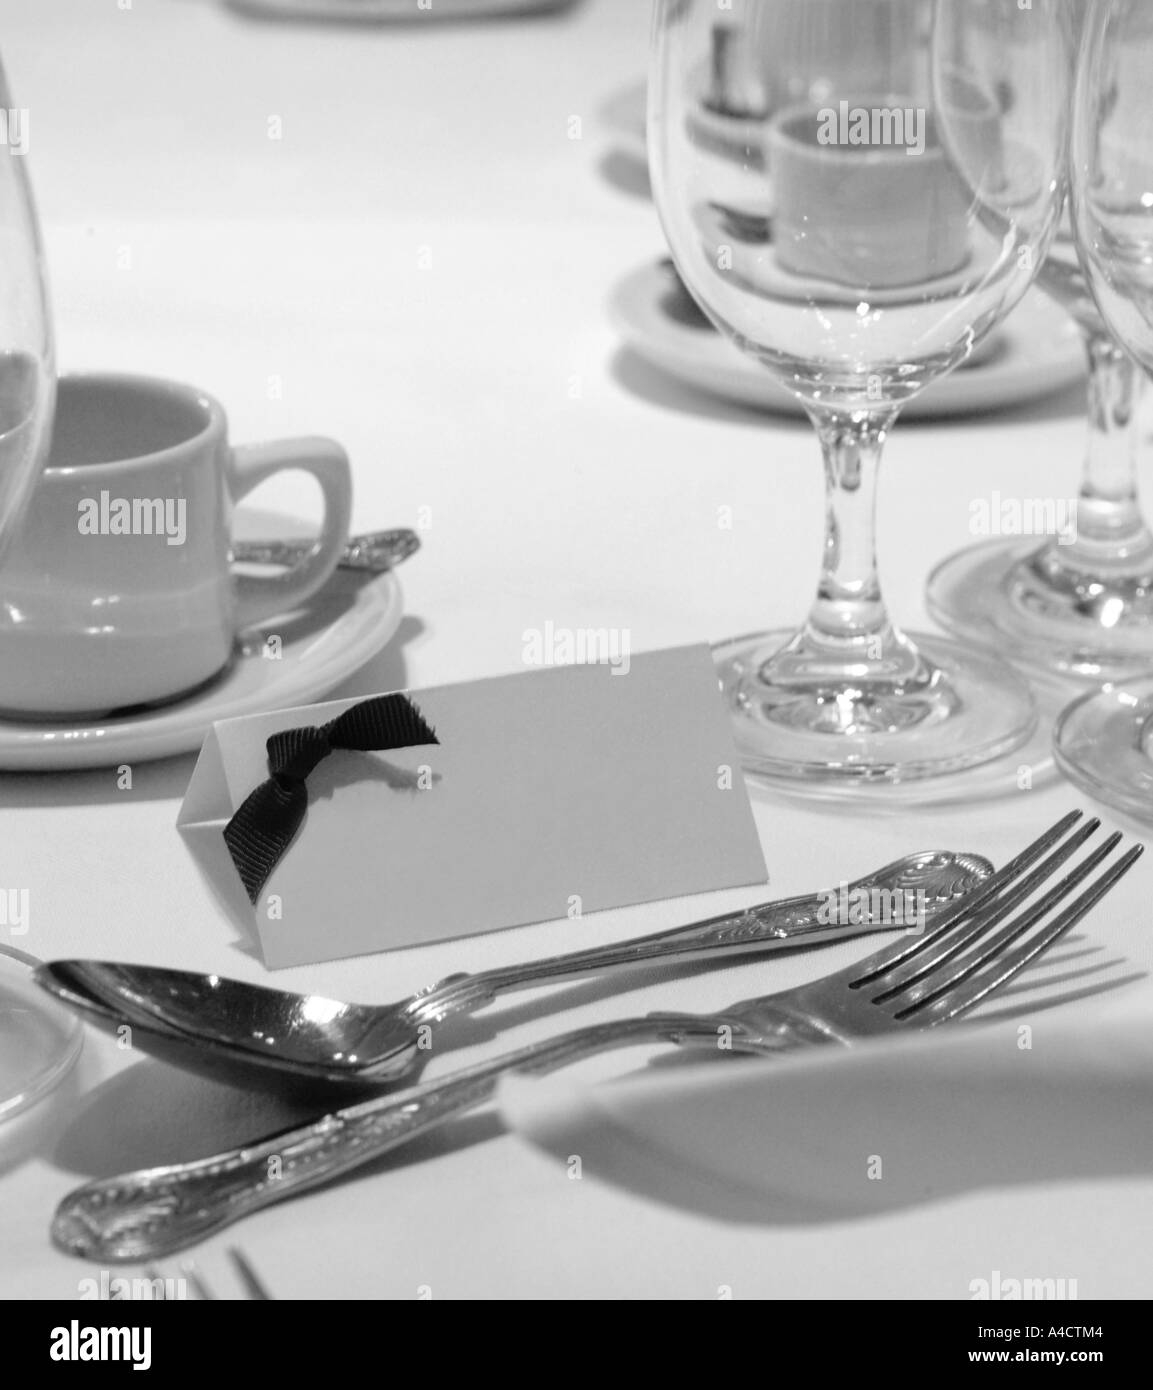 details of table setting before eating with blank name card for creative interpretation or addition offering a personal touch Stock Photo